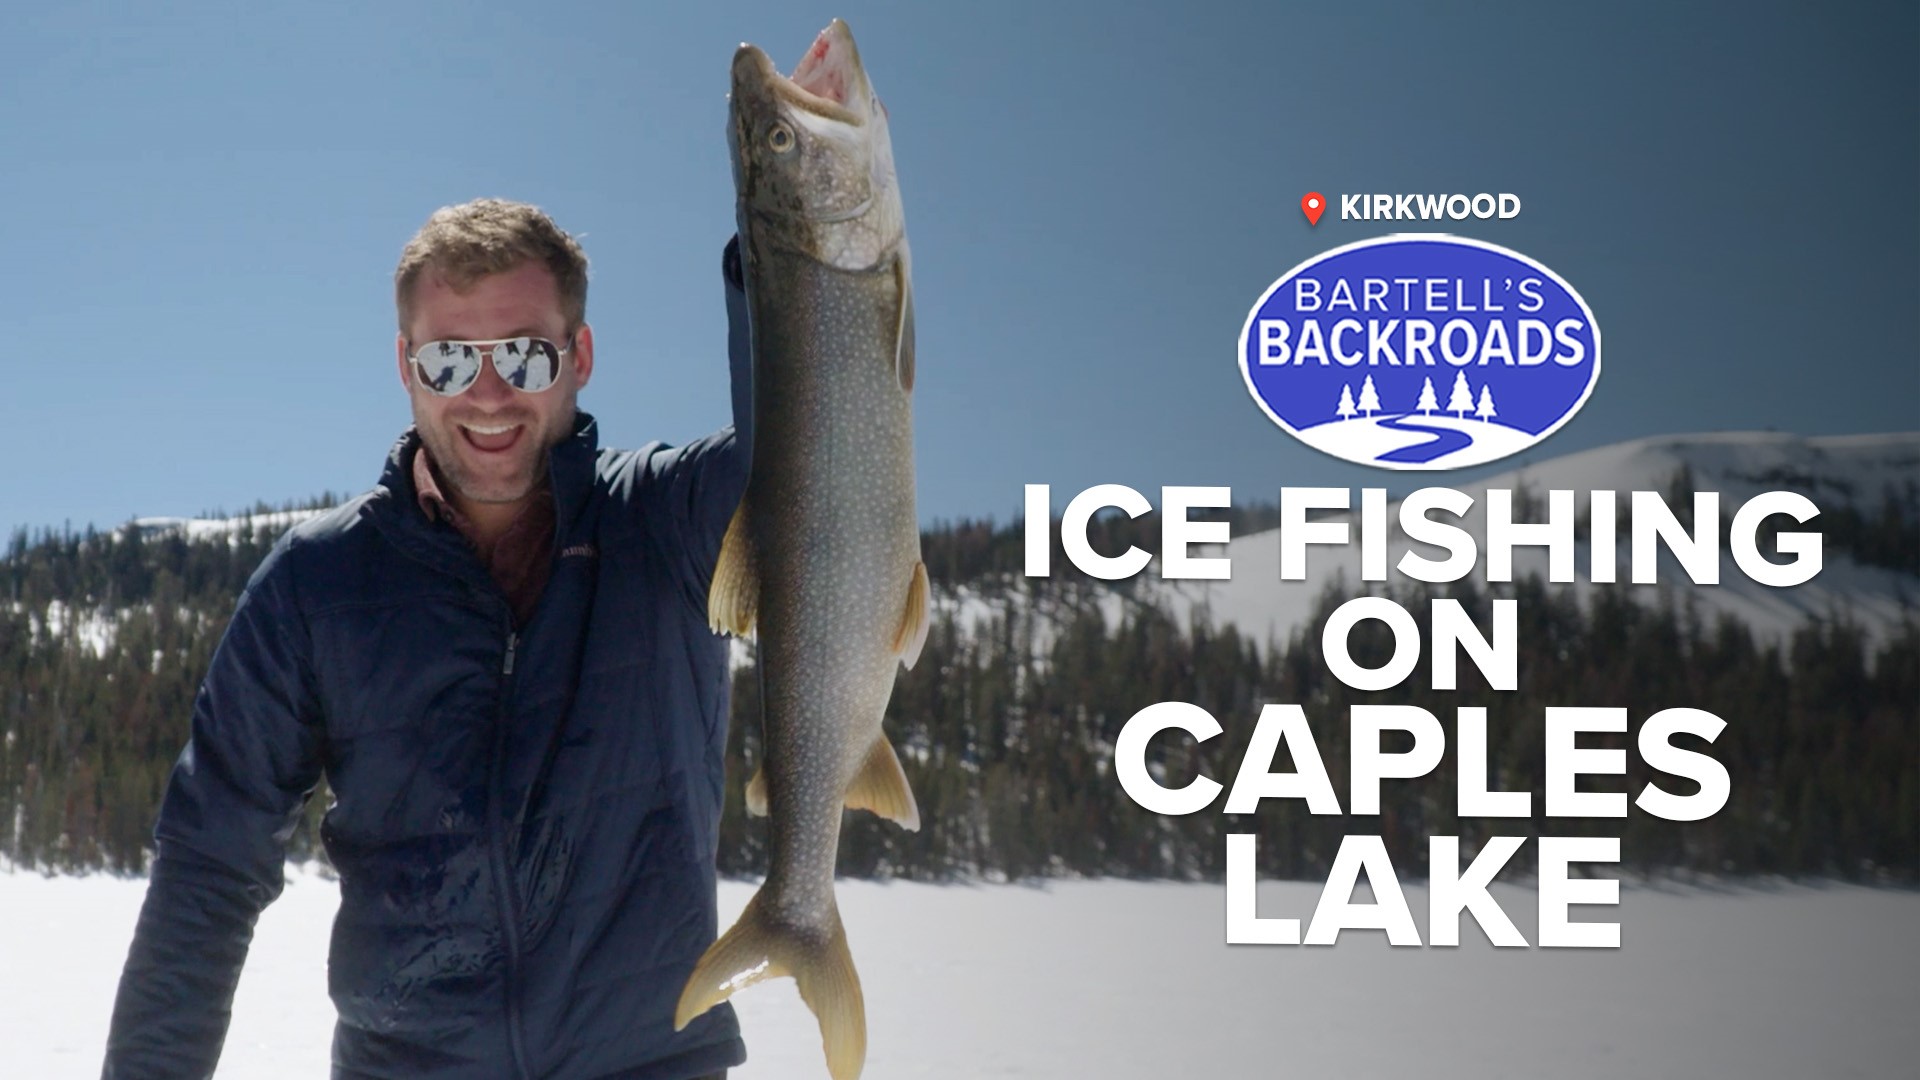 Gather 'round the hole! It's ice fishing time!  Bartell's Backroads ⋅ The  Ice Fishing Newsletter